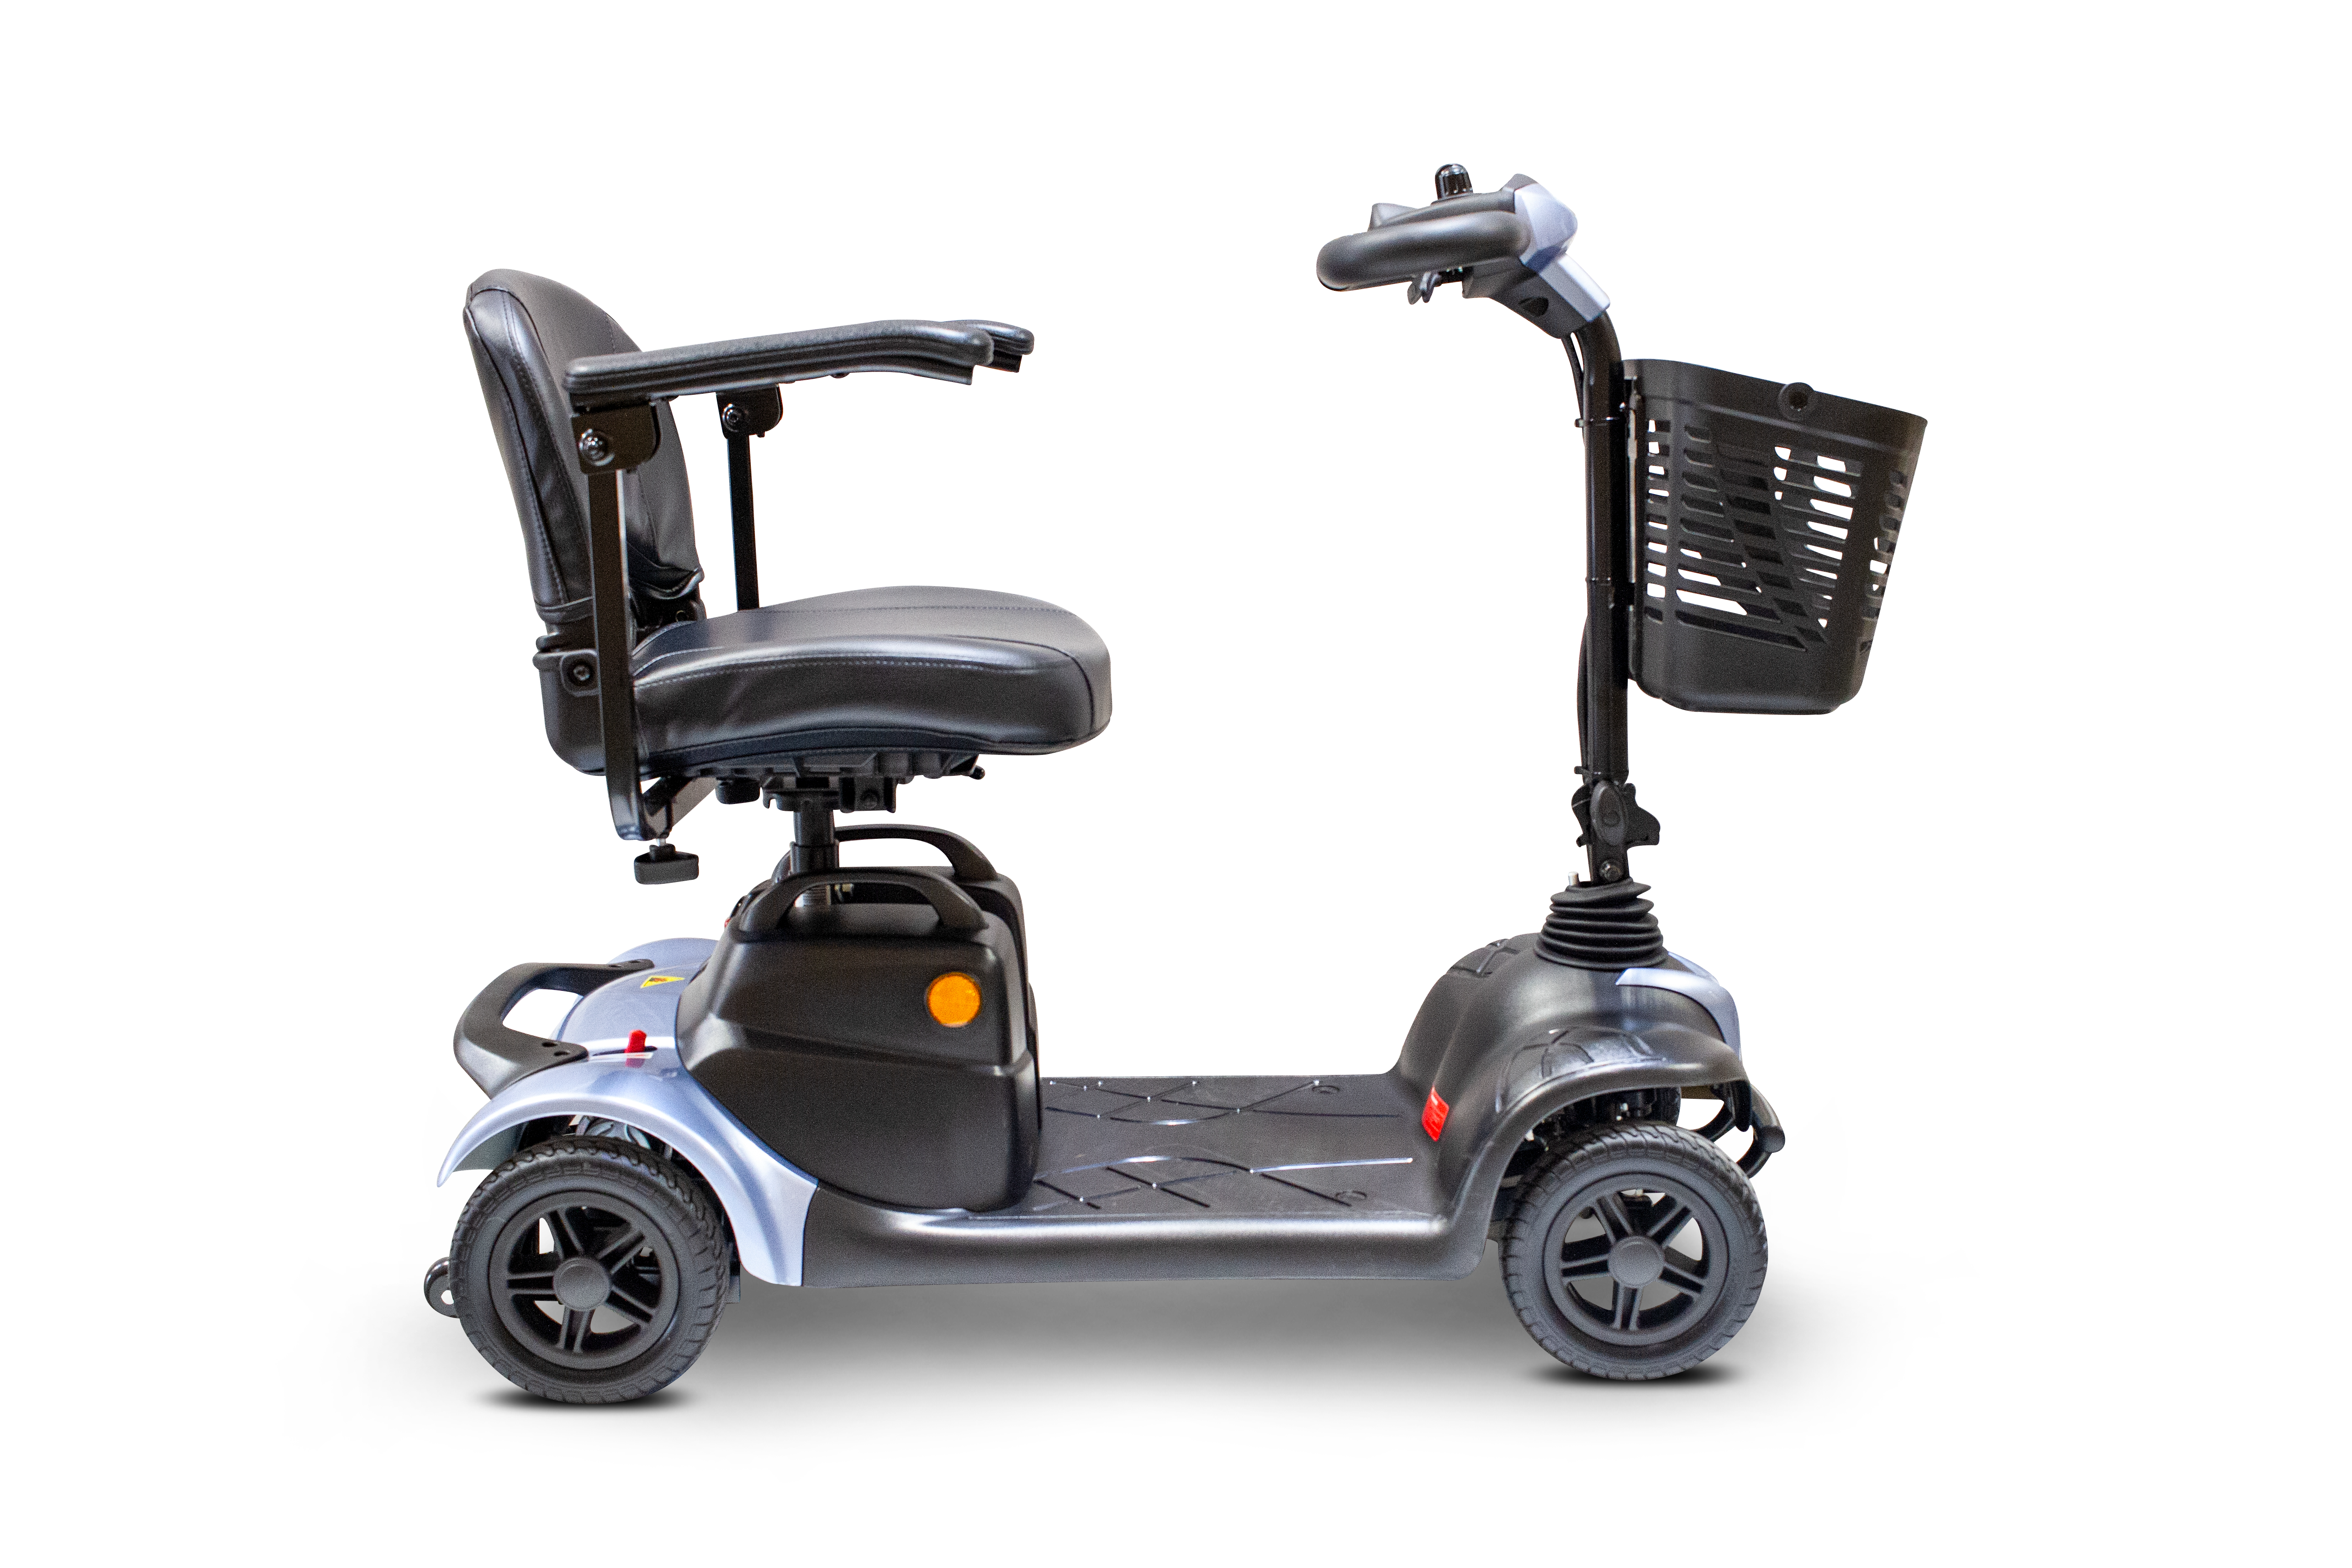 4 WHEEL SCOOTER EW-M39 Electric 4 Wheel Portable Travel Mobility Scooter by E-wheels Medical - PureUps